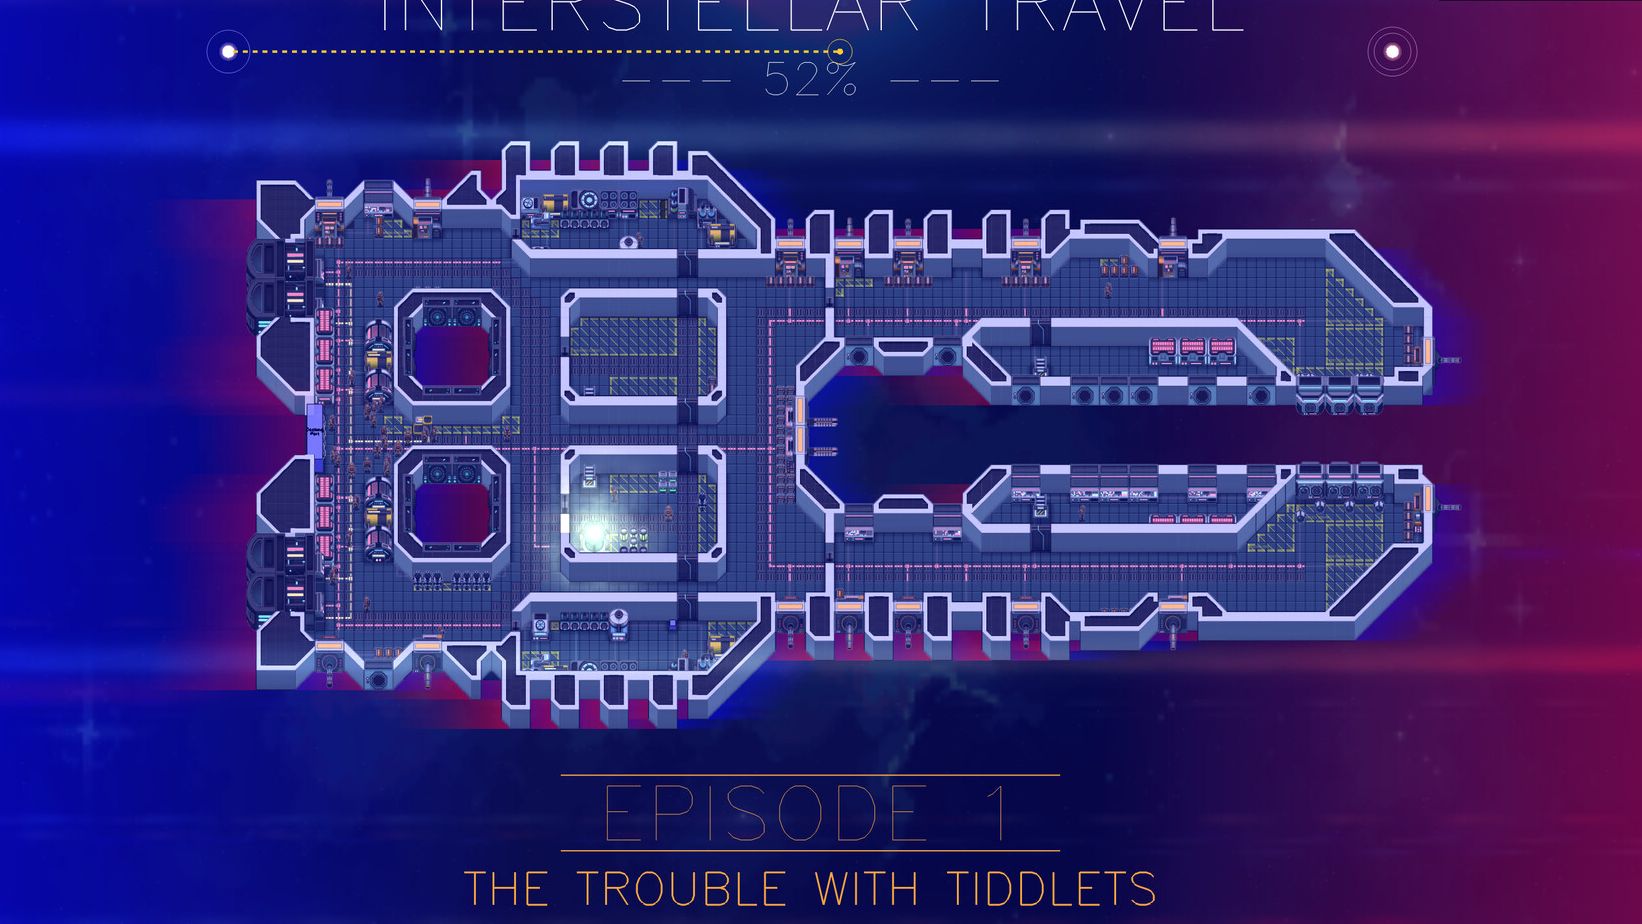 A starship in The Last Starship making a FTL jump, the screen going all blue and purple